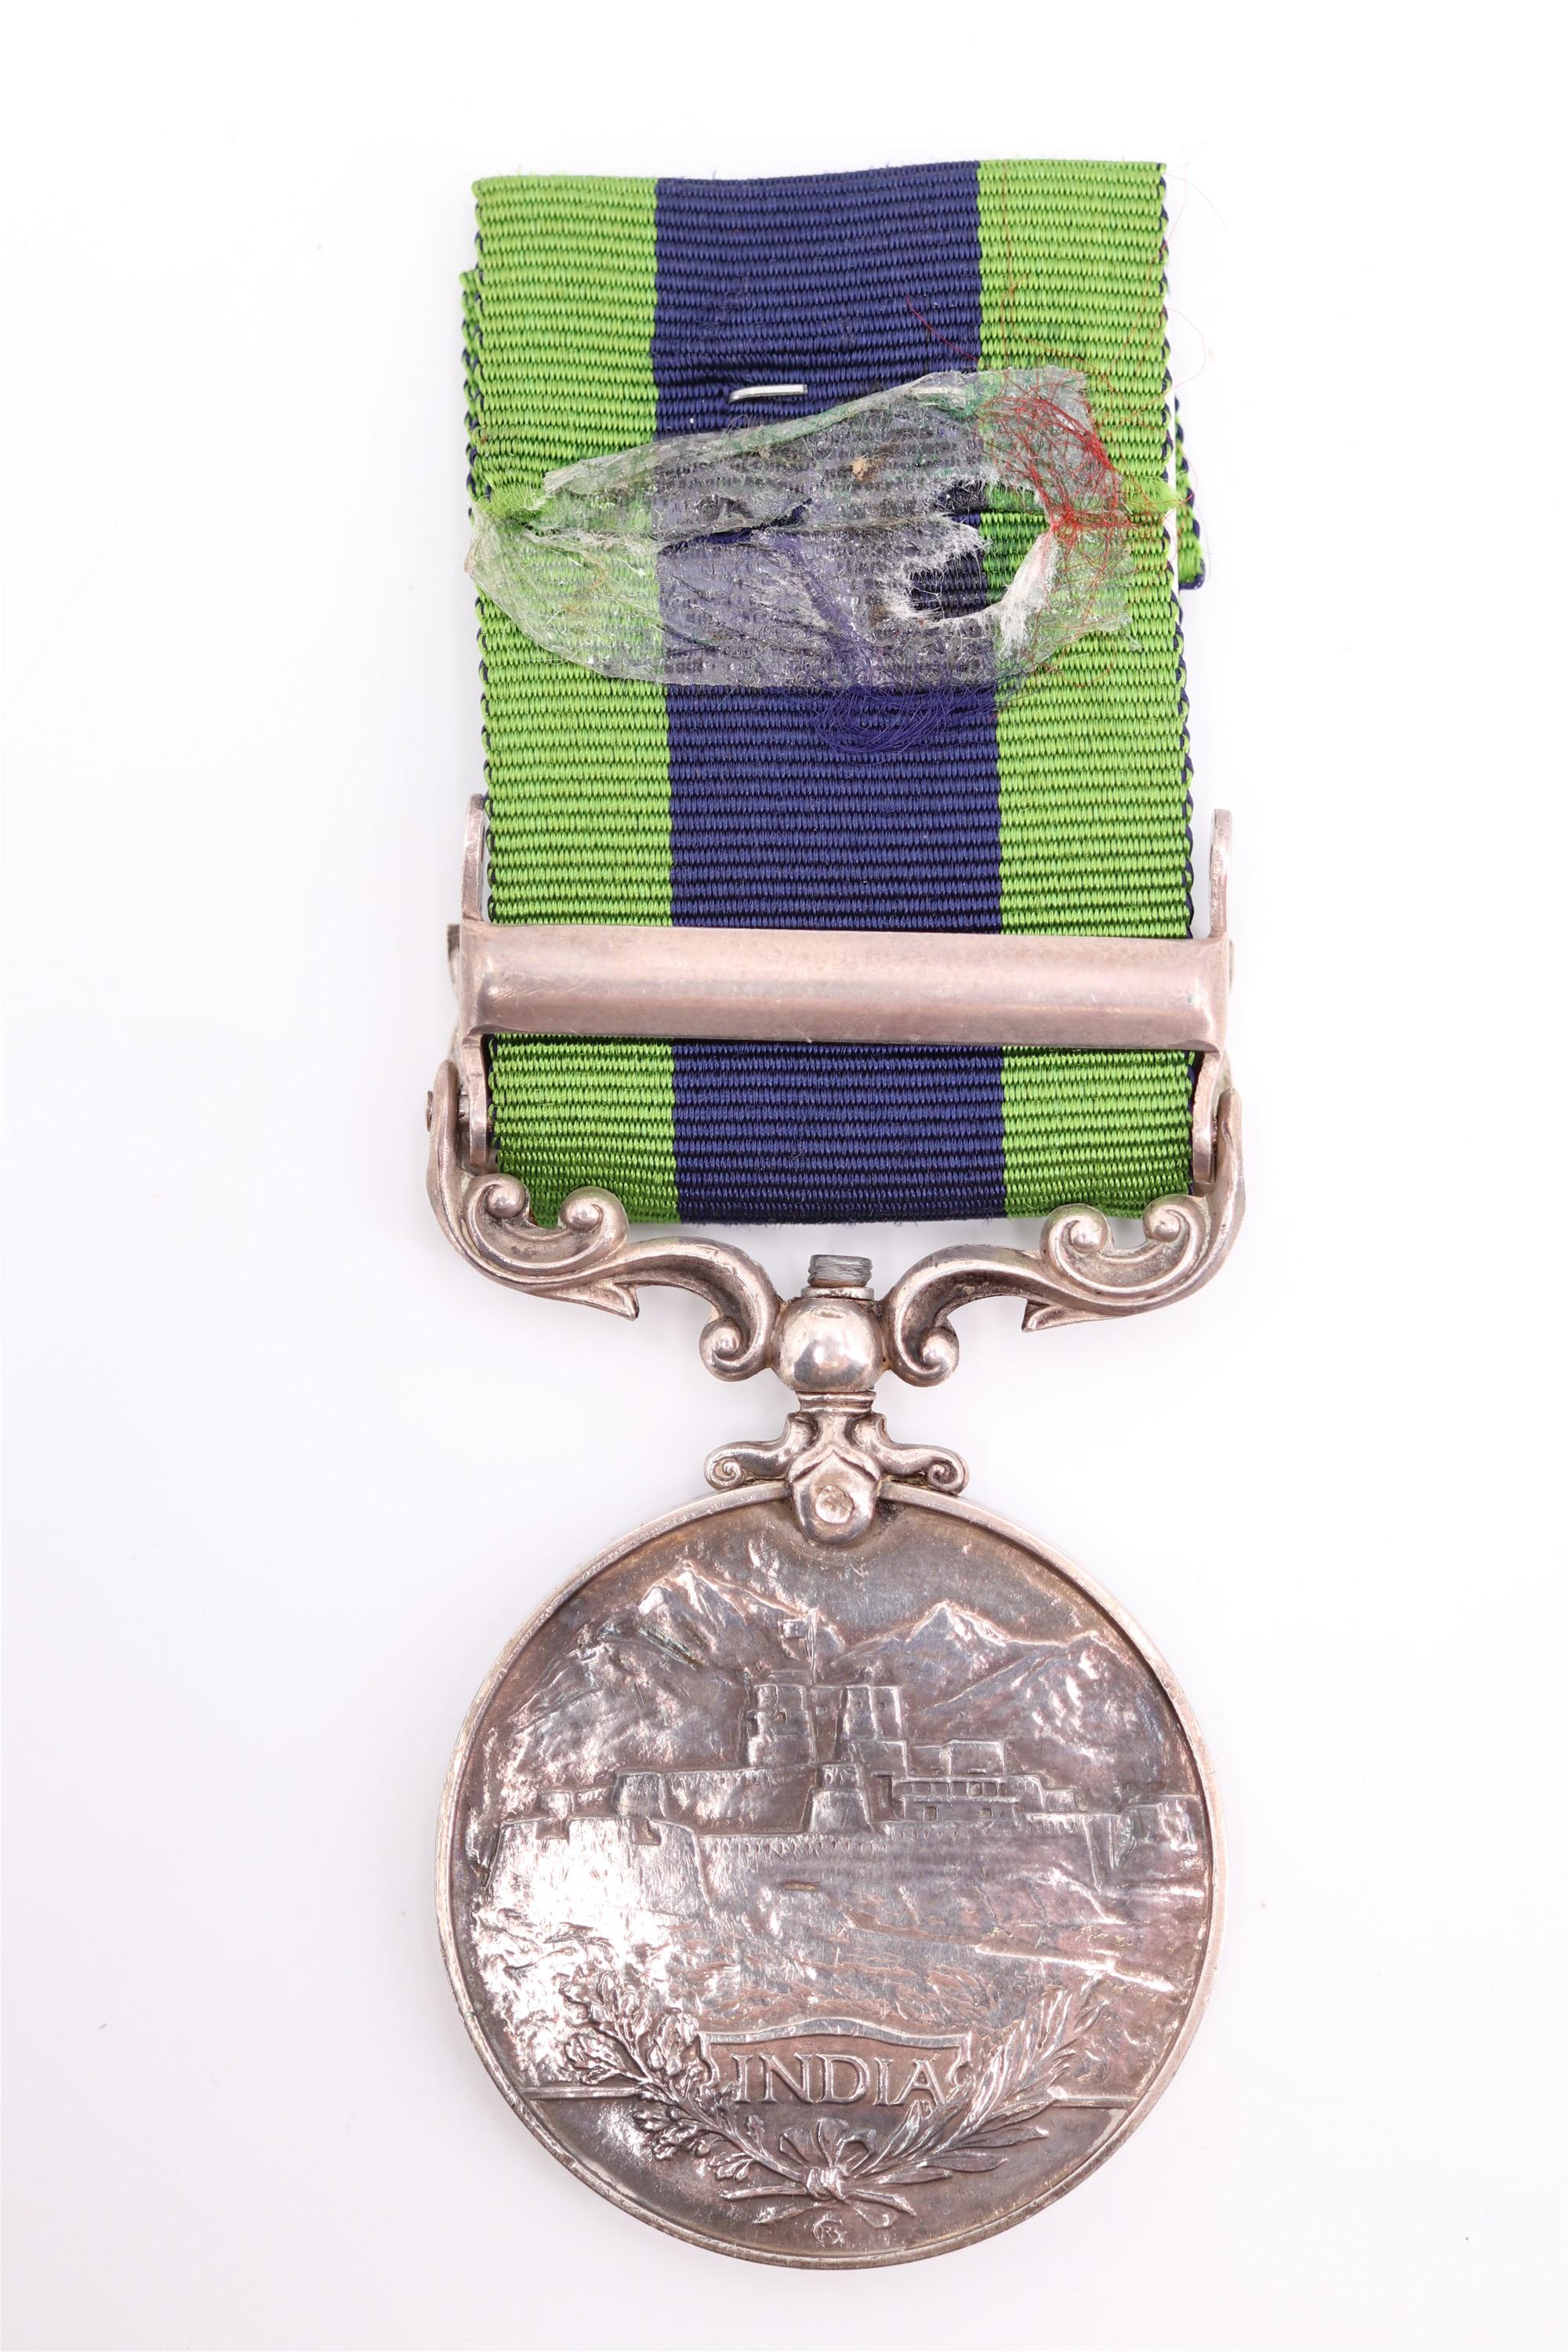 An India General Service Medal with North West Frontier 1930-31 clasp to 3594553 Pte R W - Image 2 of 2